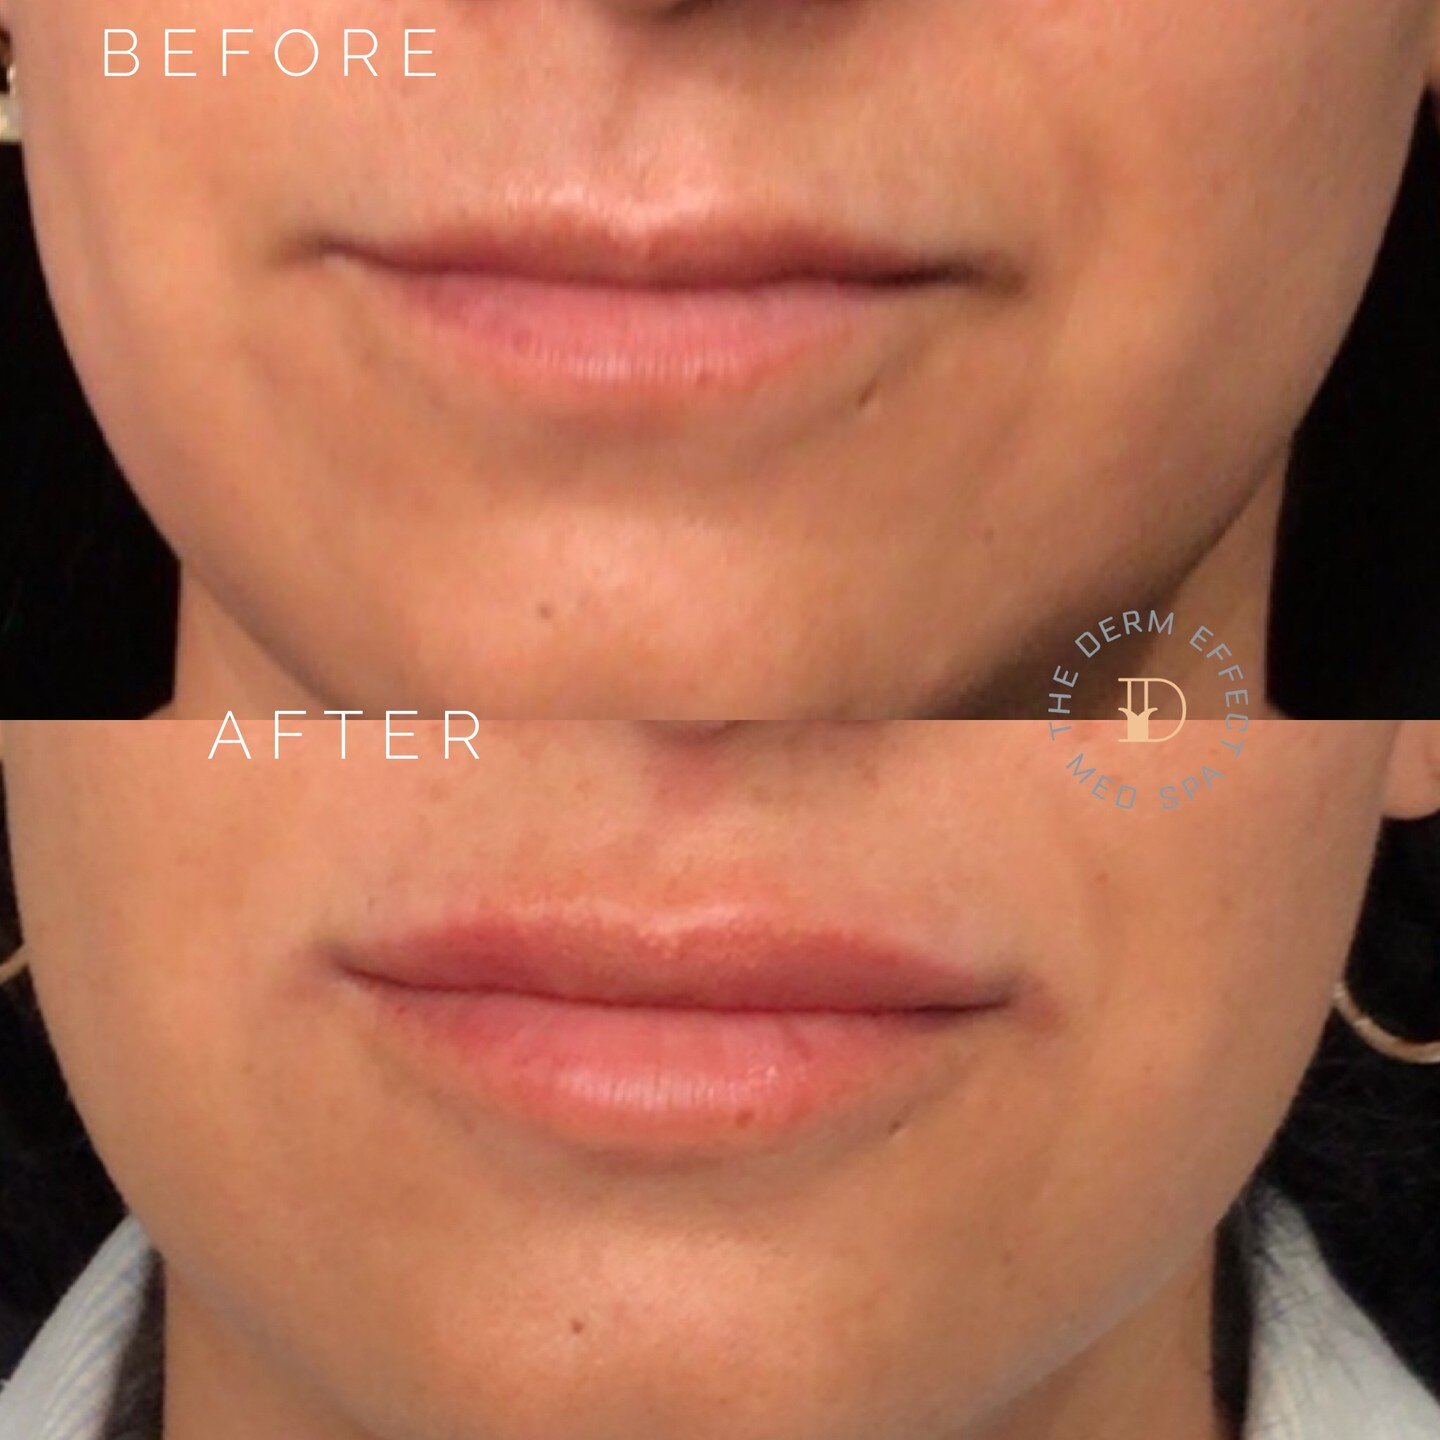 👄This beauty wanted to add volume so we focused the filler in her top lip and slightly filled her lower lip to complement, define, and add hydration. The result is a more feminine, youthful pout. We love!💖

___
Injections by: Mena Mesdaq, PA
Superv